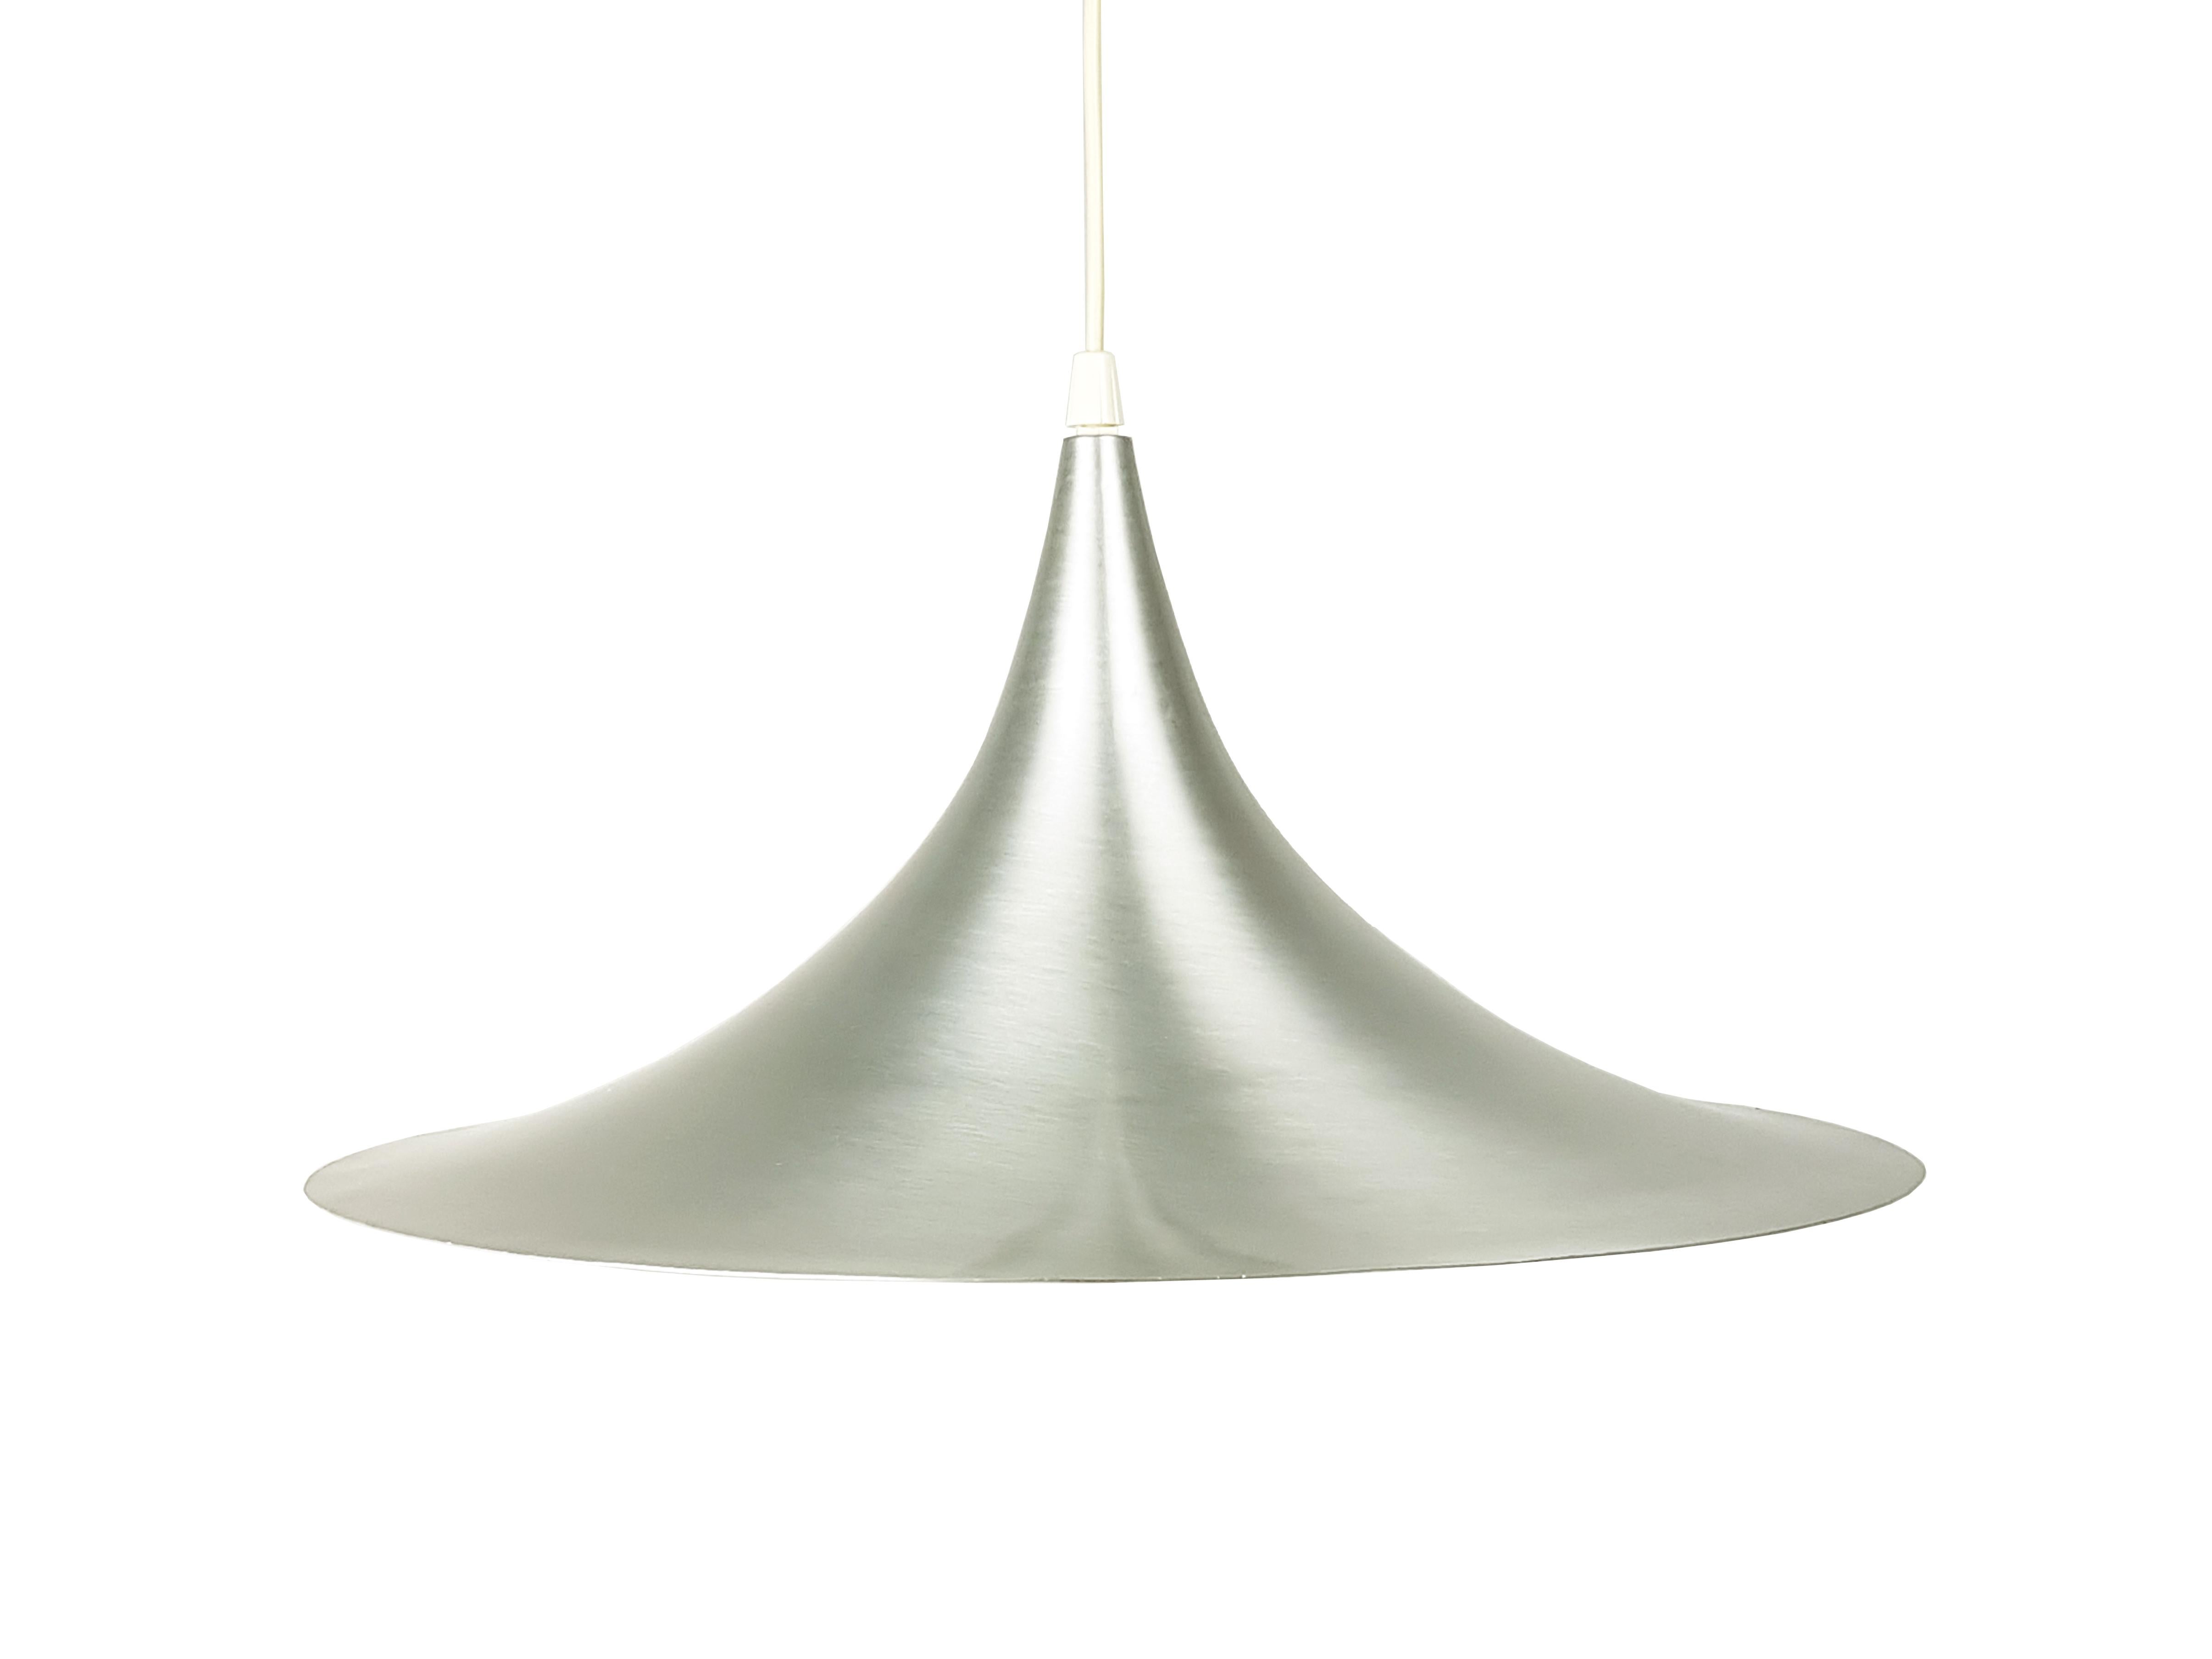 Semi pendant lamp by Claus Bonderup & Torsten Thorup, Denmark, 1967. Based on two quarter-circles - back-to-back. It is made from brushed aluminum. 
Adjustable height.
Measures: overall height cm 130 (the cable can be shortened)
diameter: cm